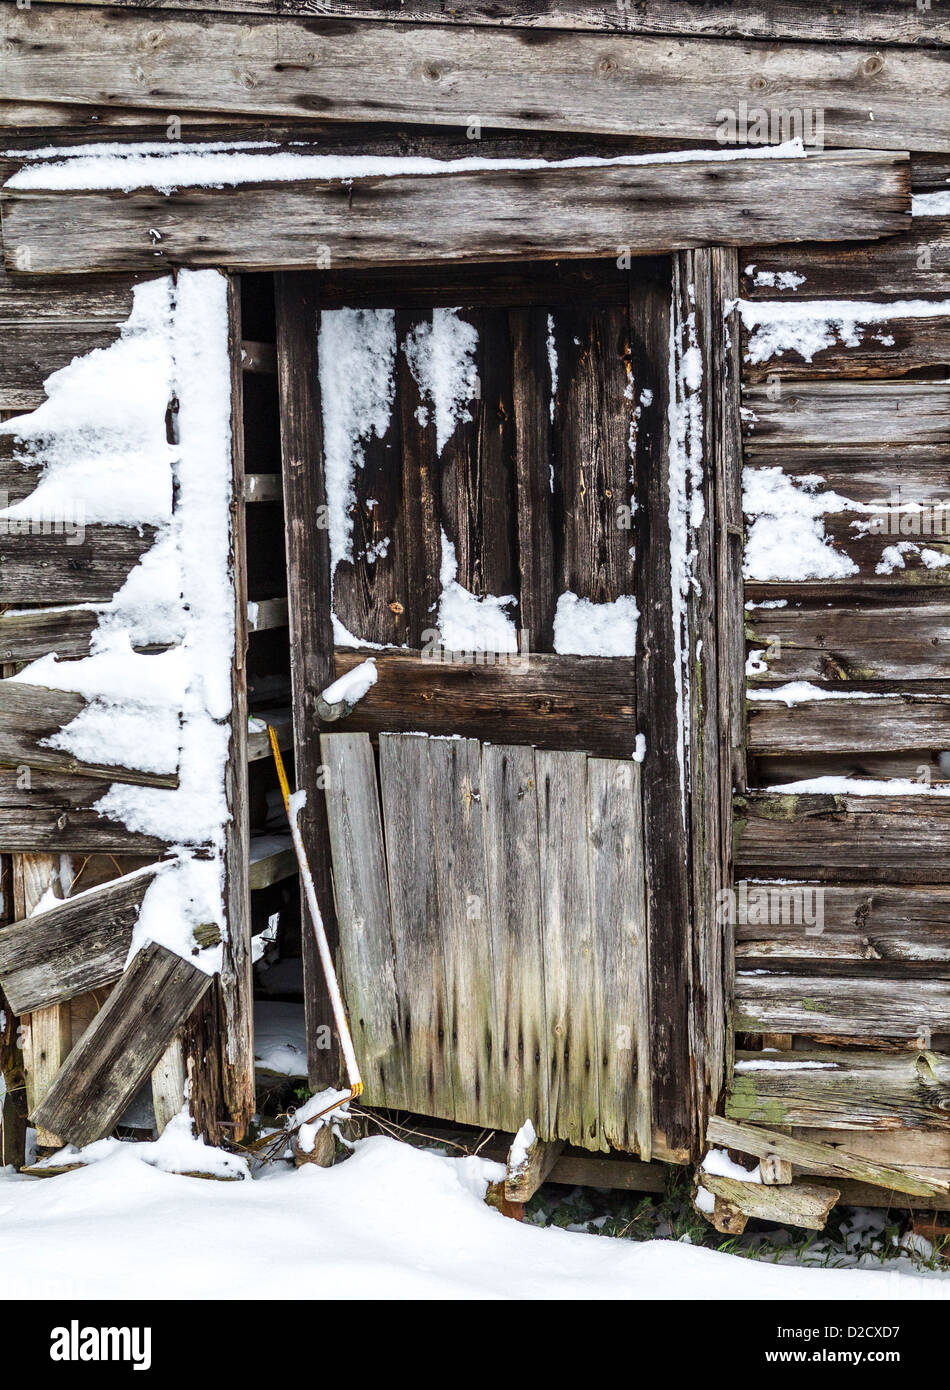 A rickety old door on a wooden shed in the snow Stock Photo